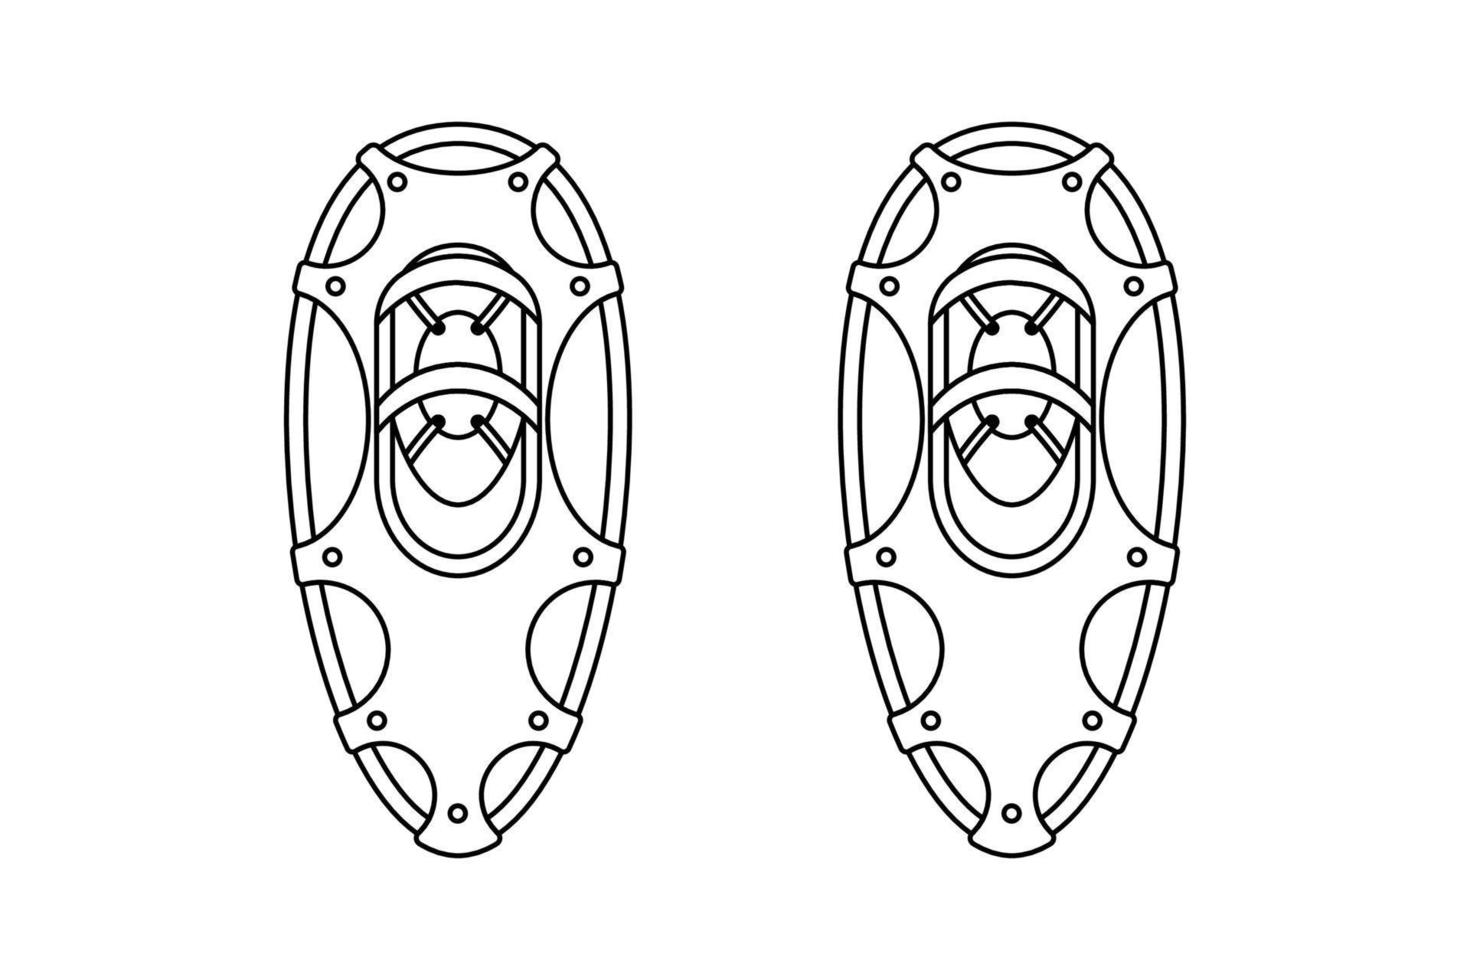 Snowshoes in the style of line art. vector illustration